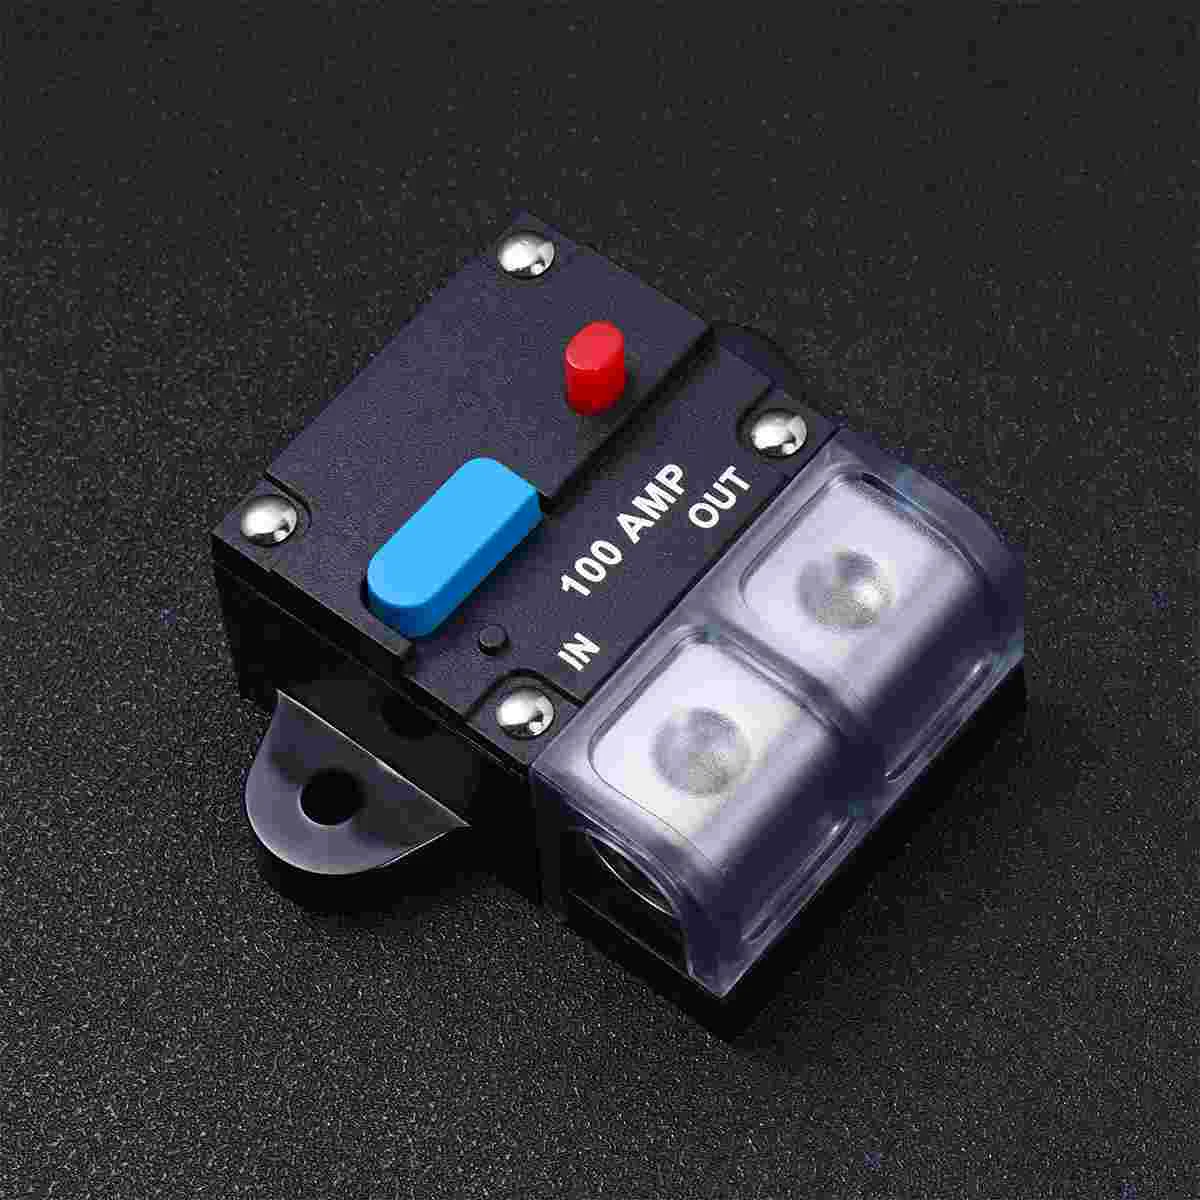 

100A 200A 250A 300A Car Resettable Circuit Breaker Self-recovery Fuses for Cars Manual Reset Button Fuse Car Accessories